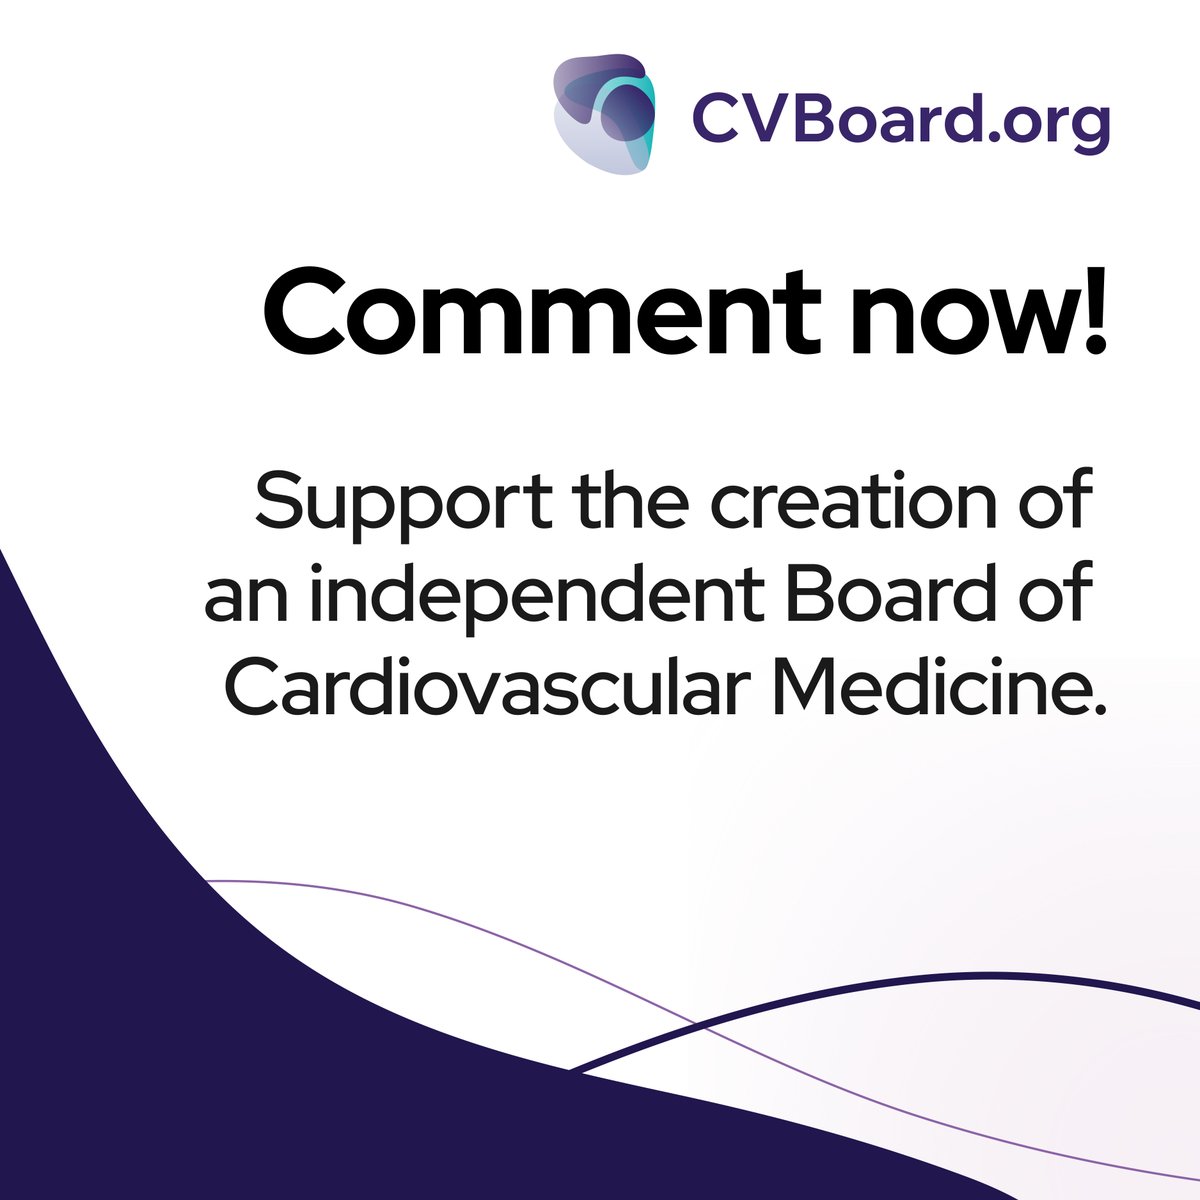 Share your support for a new, independent #CVBoard as part of the 90-day open comment period announced by ABMS. This is an important opportunity for #EPeeps to engage in the application review and approval process and provide insights into the benefits for both clinicians and…